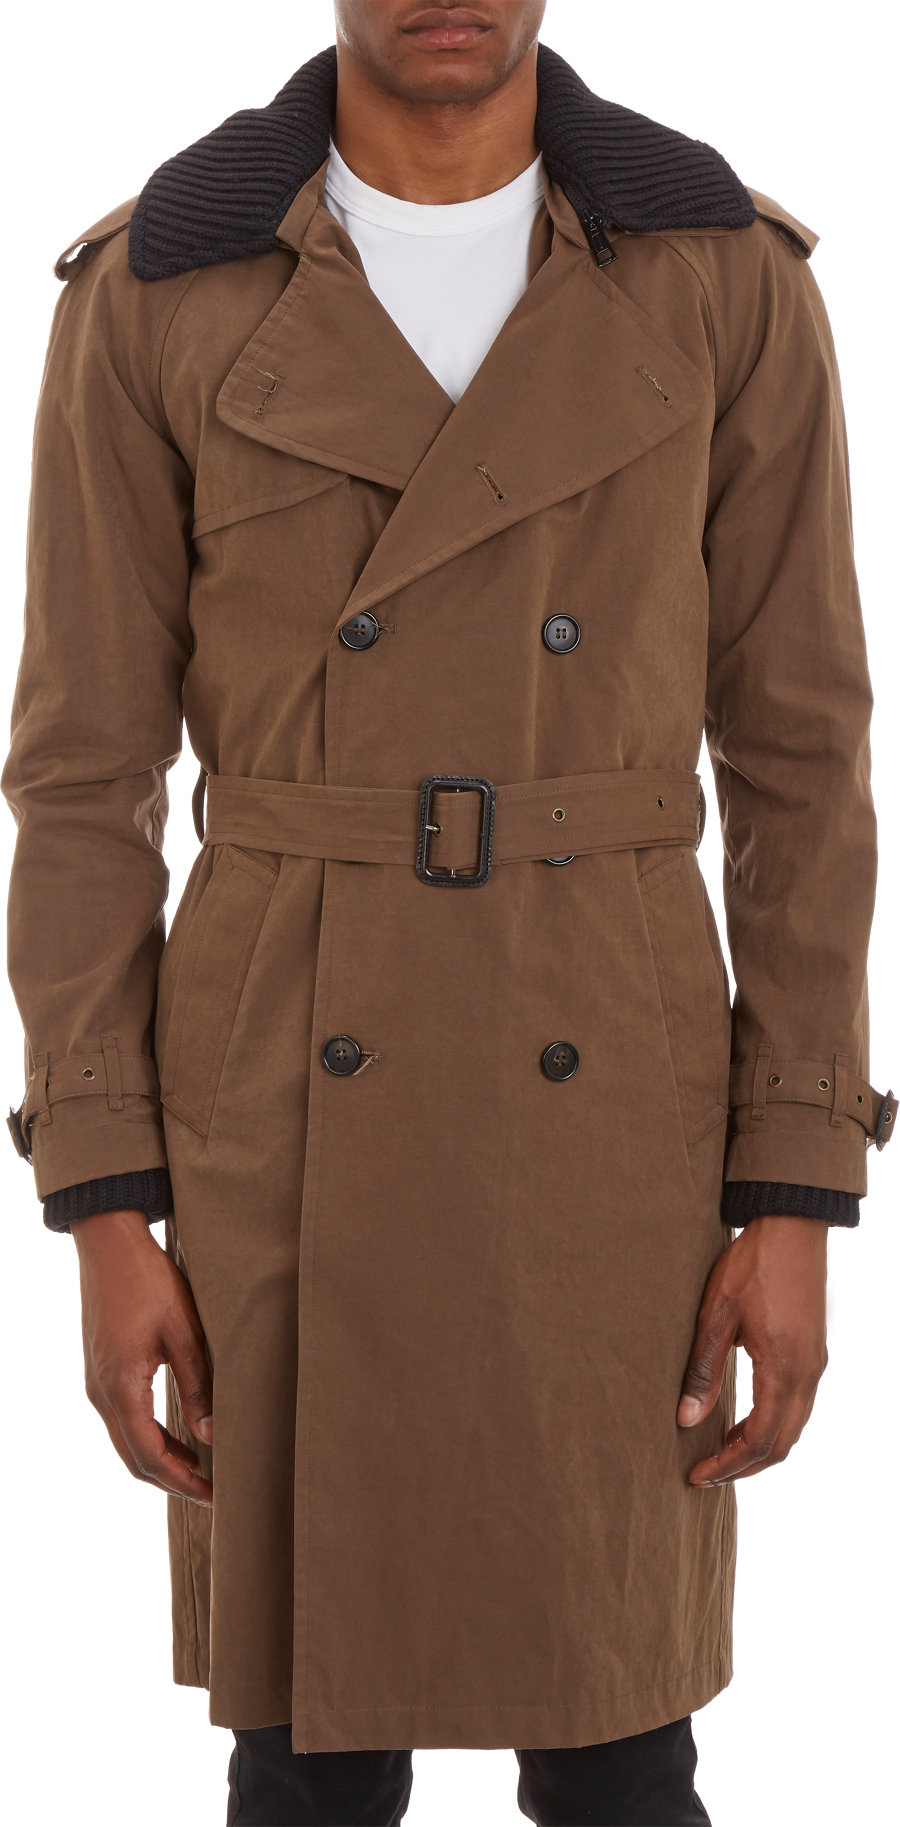 Lyst - Band Of Outsiders Double-Breasted Trench Coat in Brown for Men